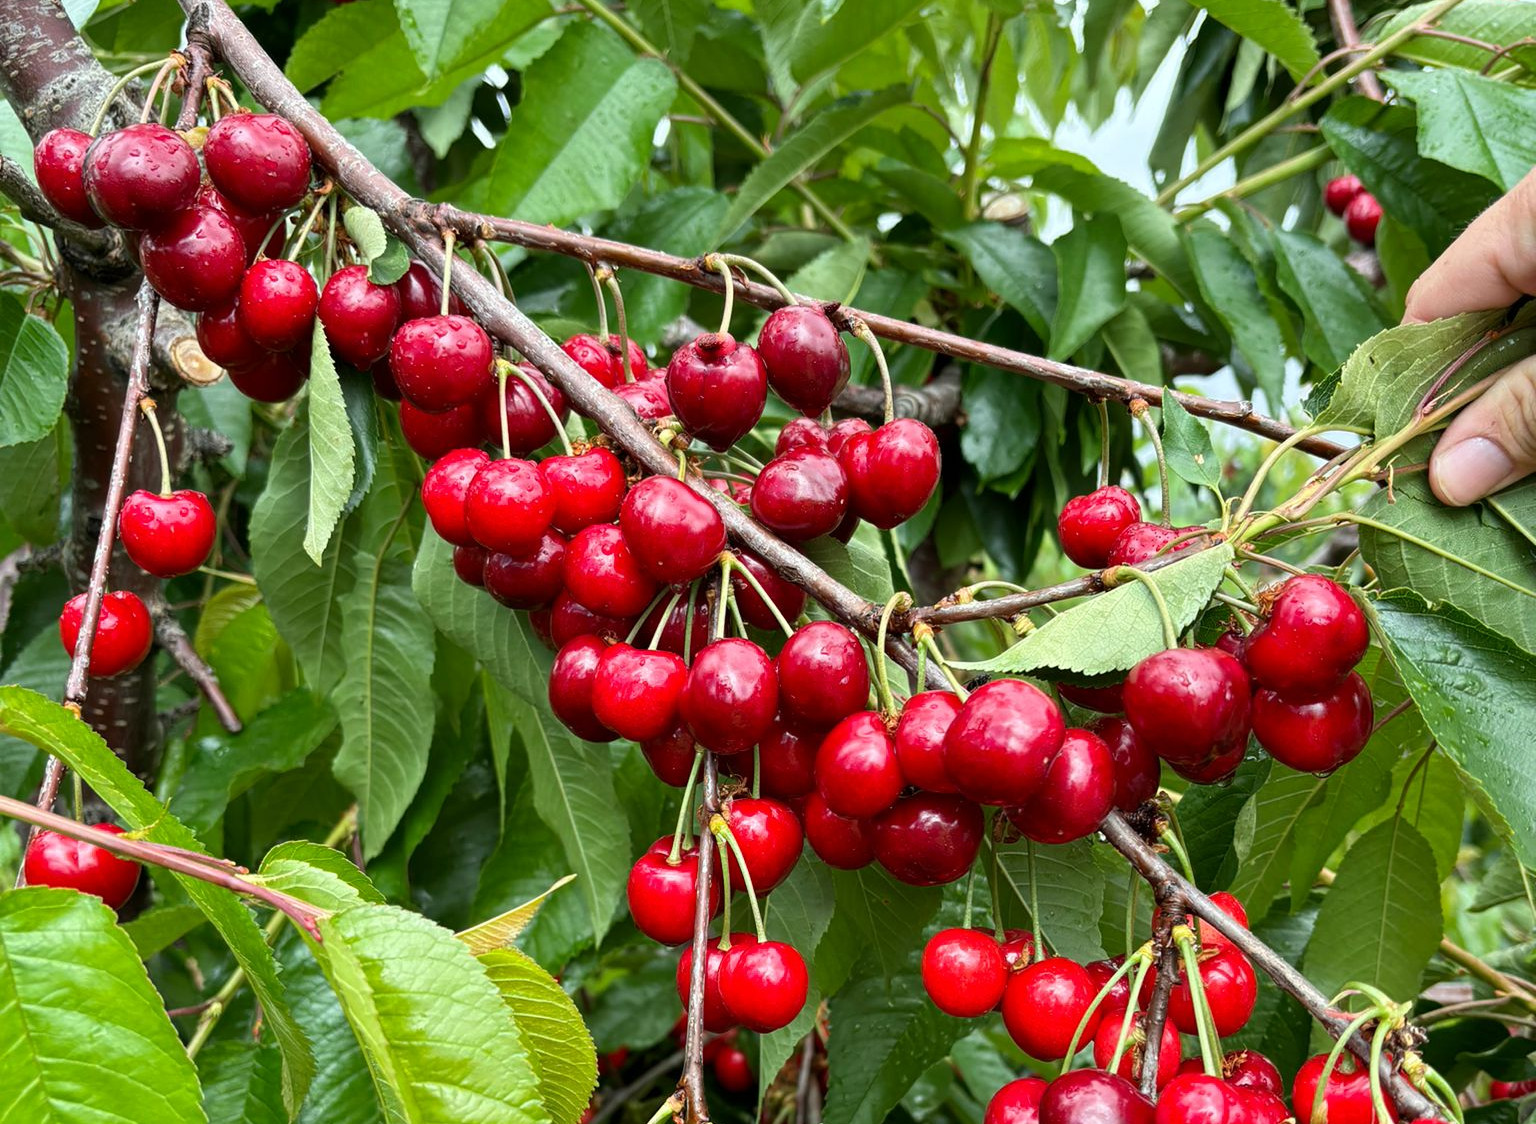 Royal Apache, a new early cherry variety